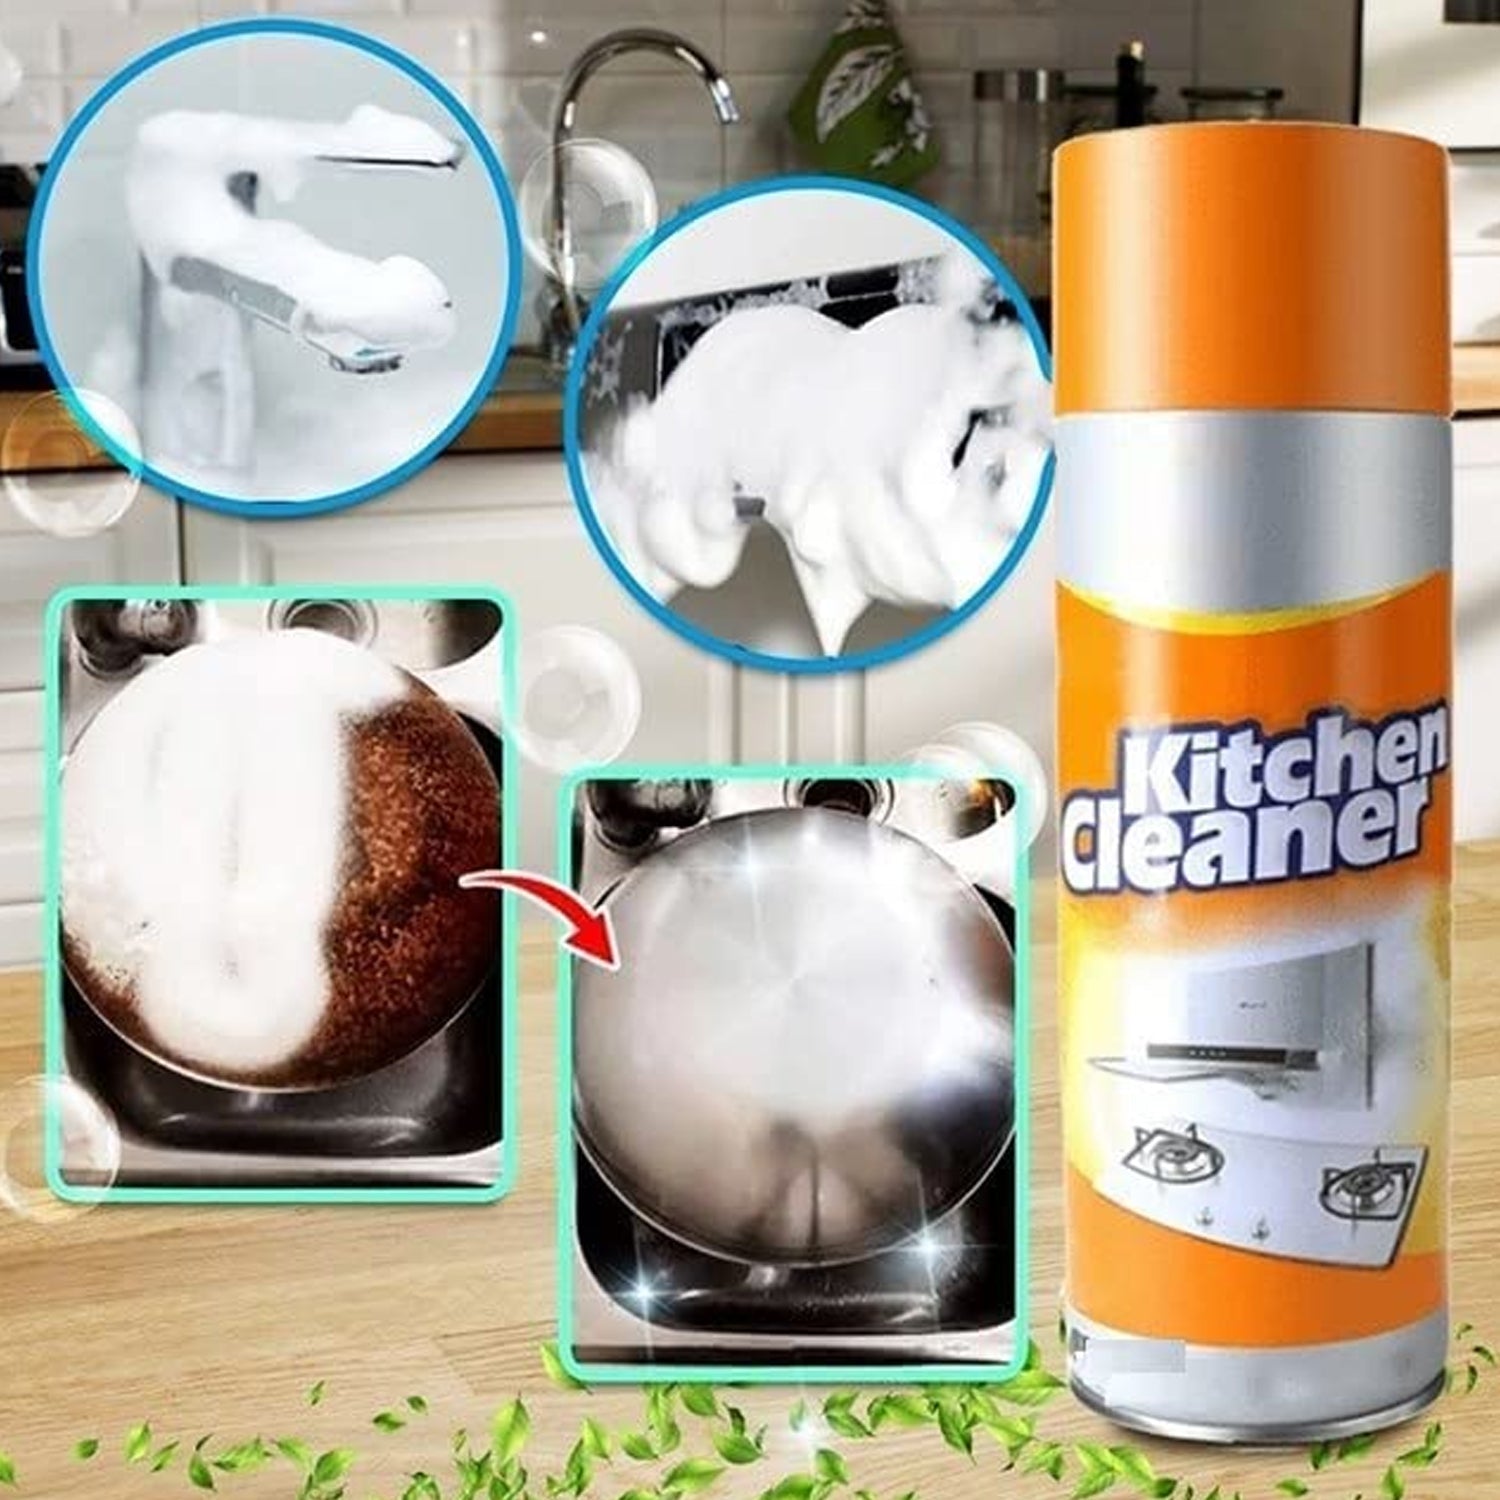 Kitchen Grease Cleaner Bubble Cleaner Multifunctional Foam Cleaner Rust  Remove Household Cleaning Tool Bubble Spray Dropshipping